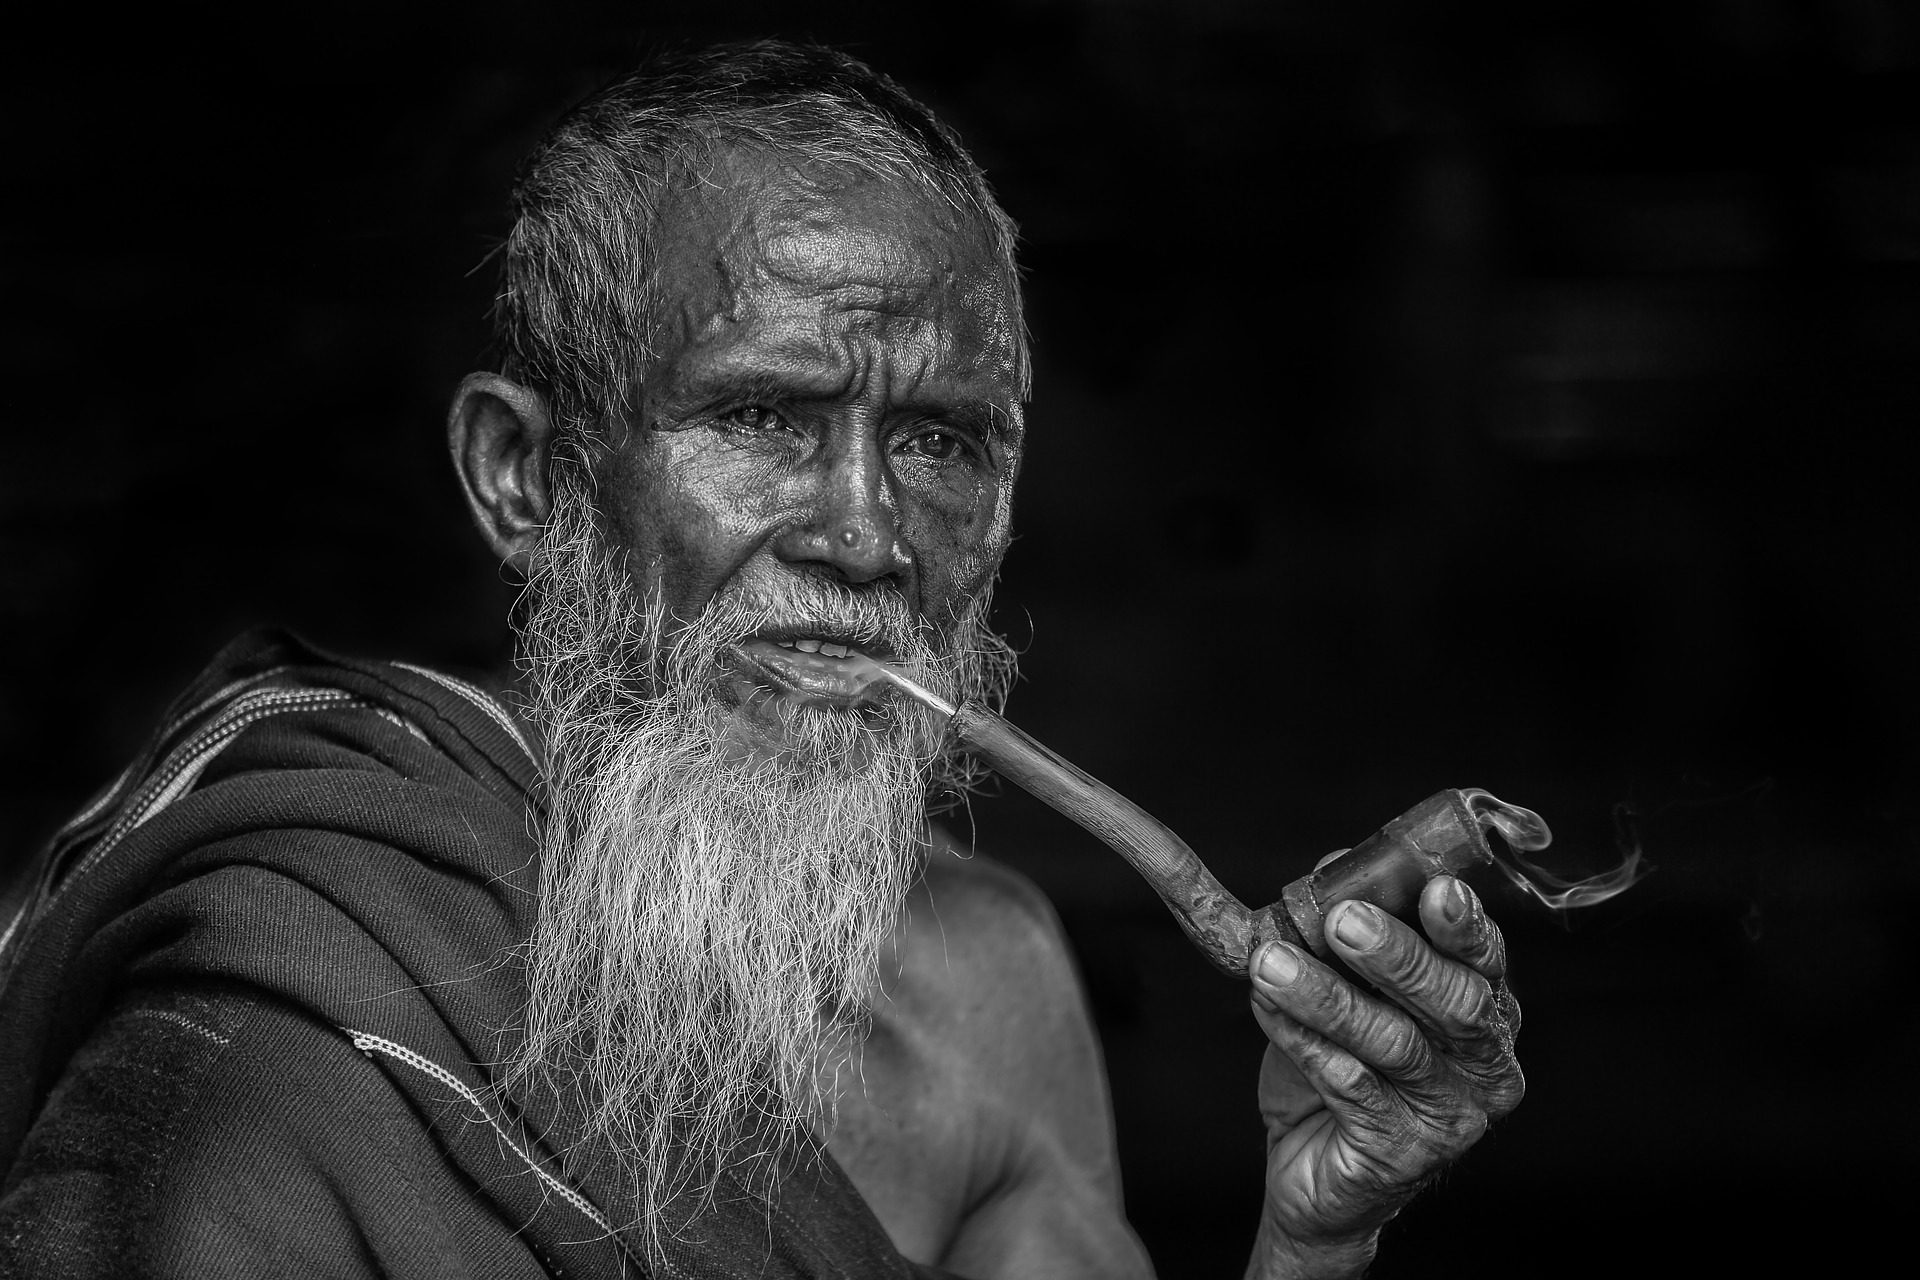 Poor Old Man With Tall Beard Wallpaper In Grayscale - Smoking - HD Wallpaper 